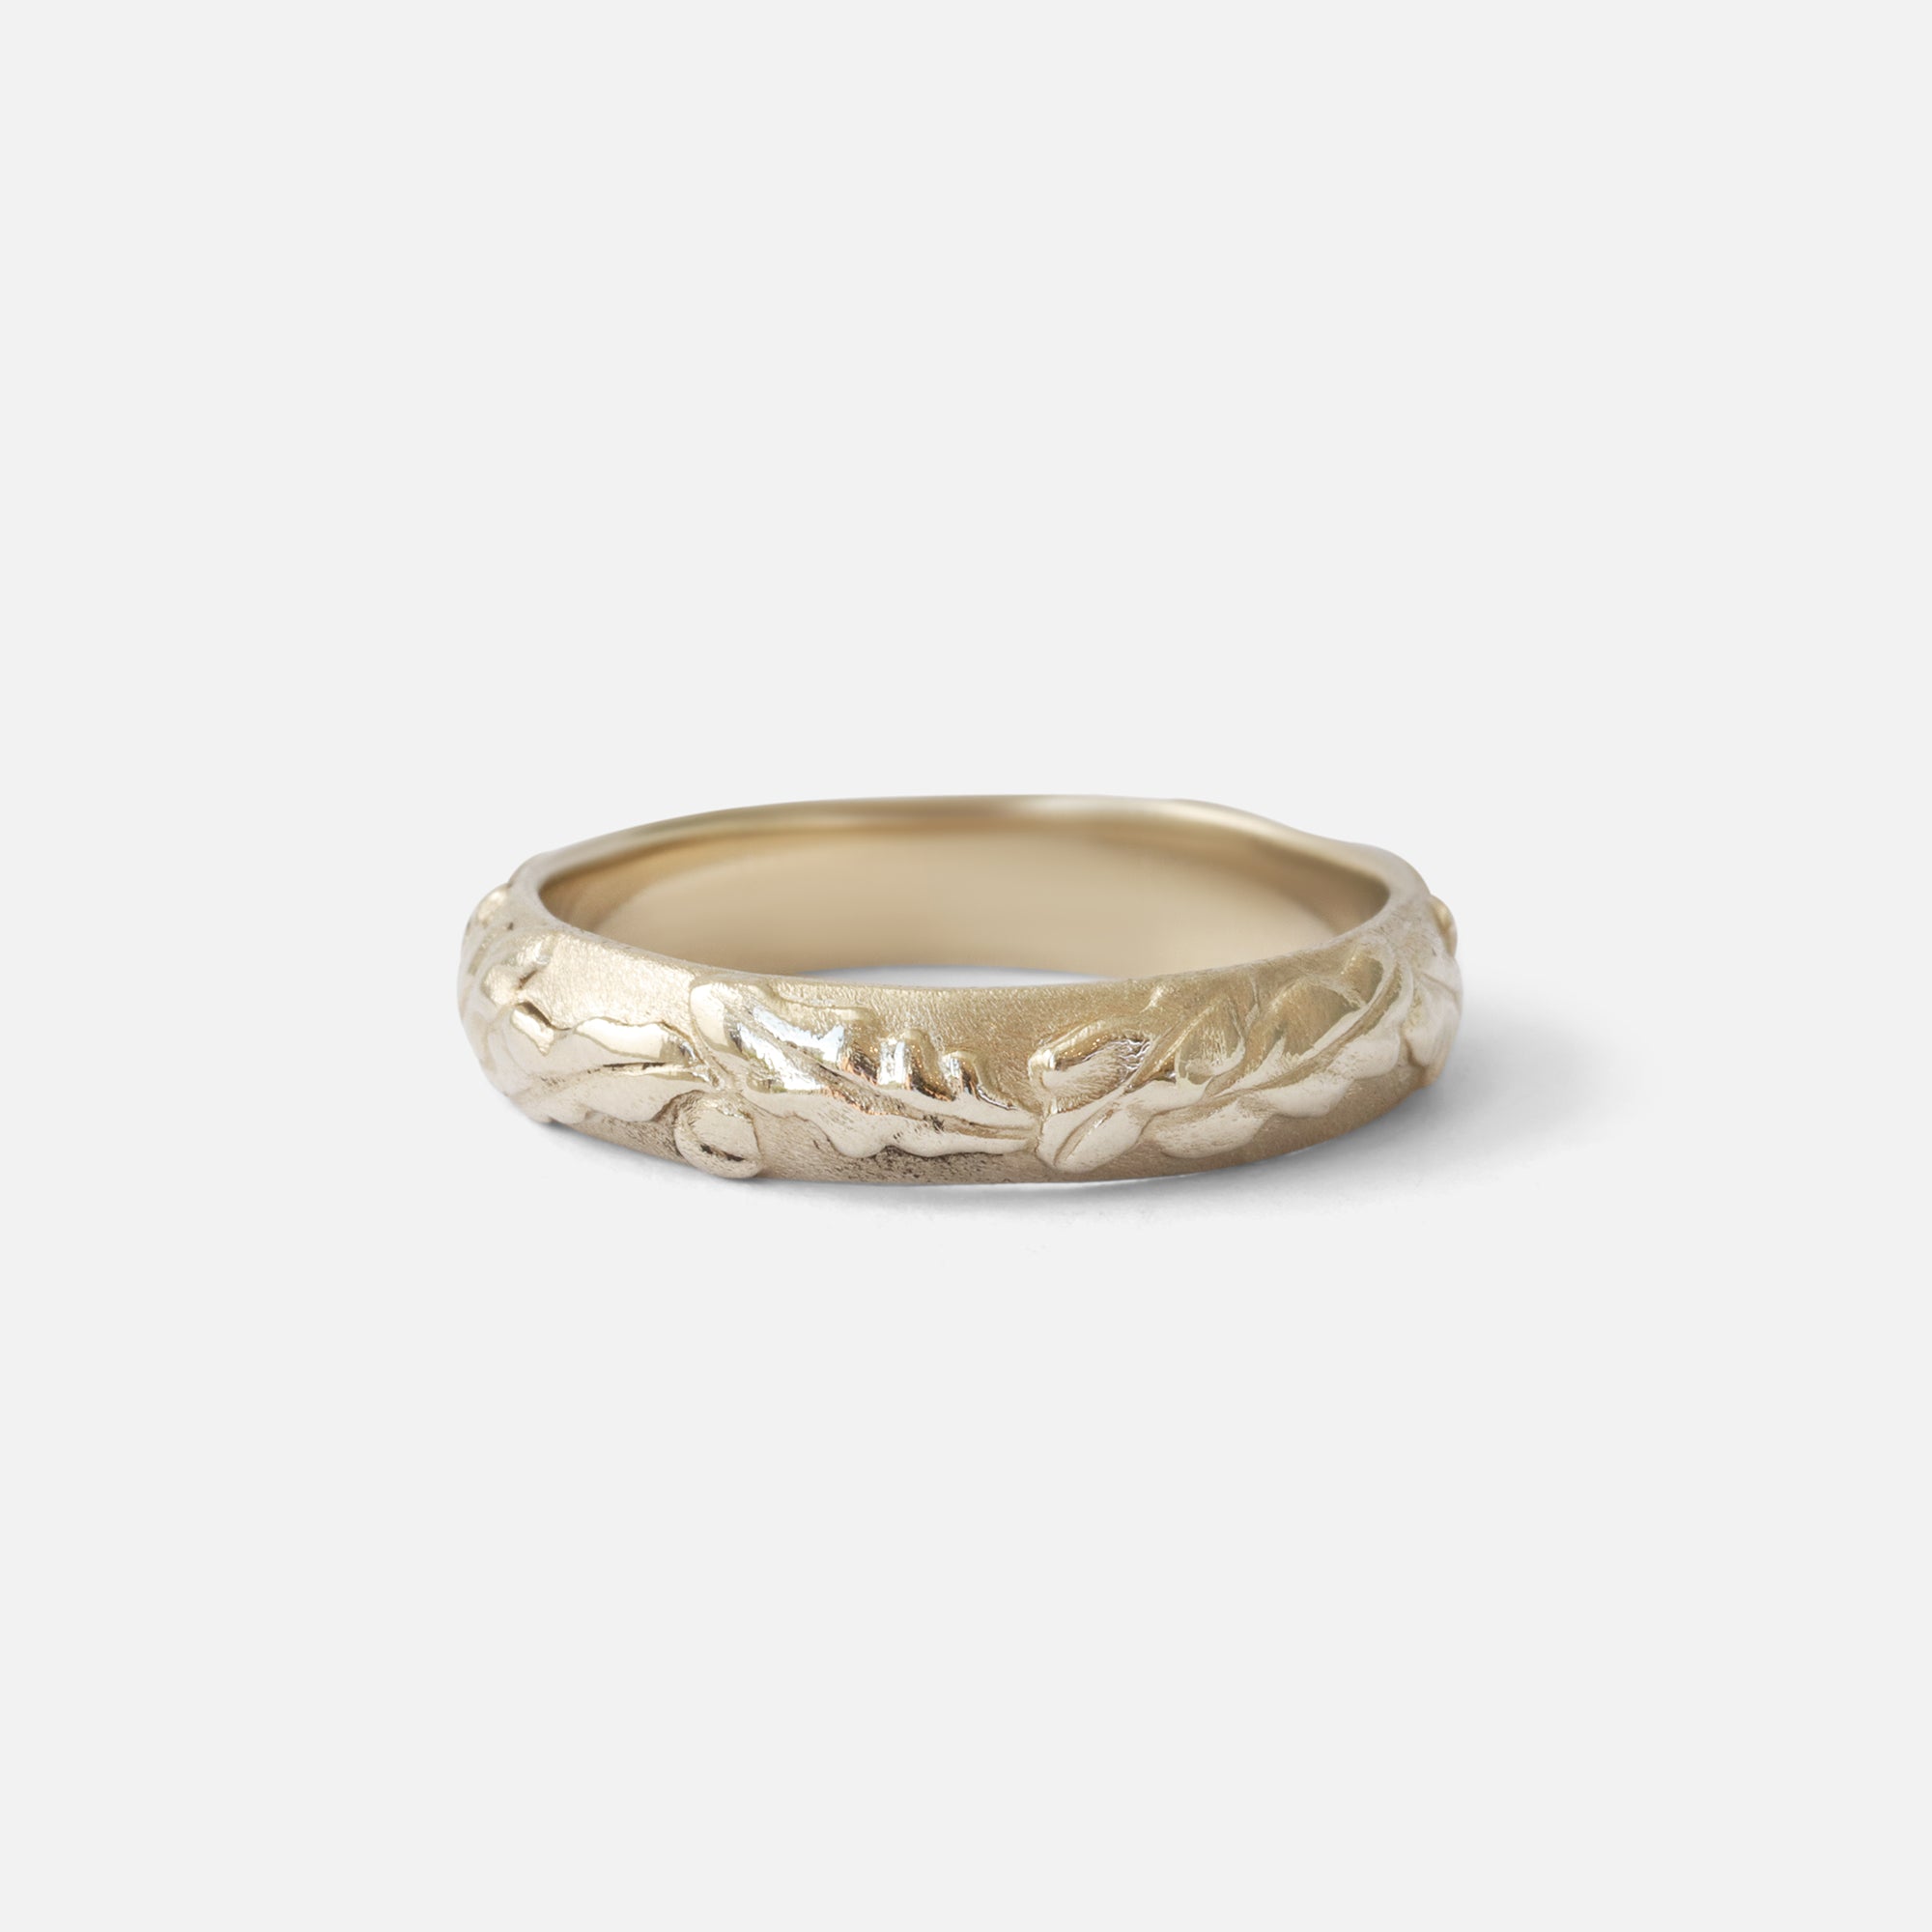 Oak Band By O Channell Designs in Wedding Bands Category